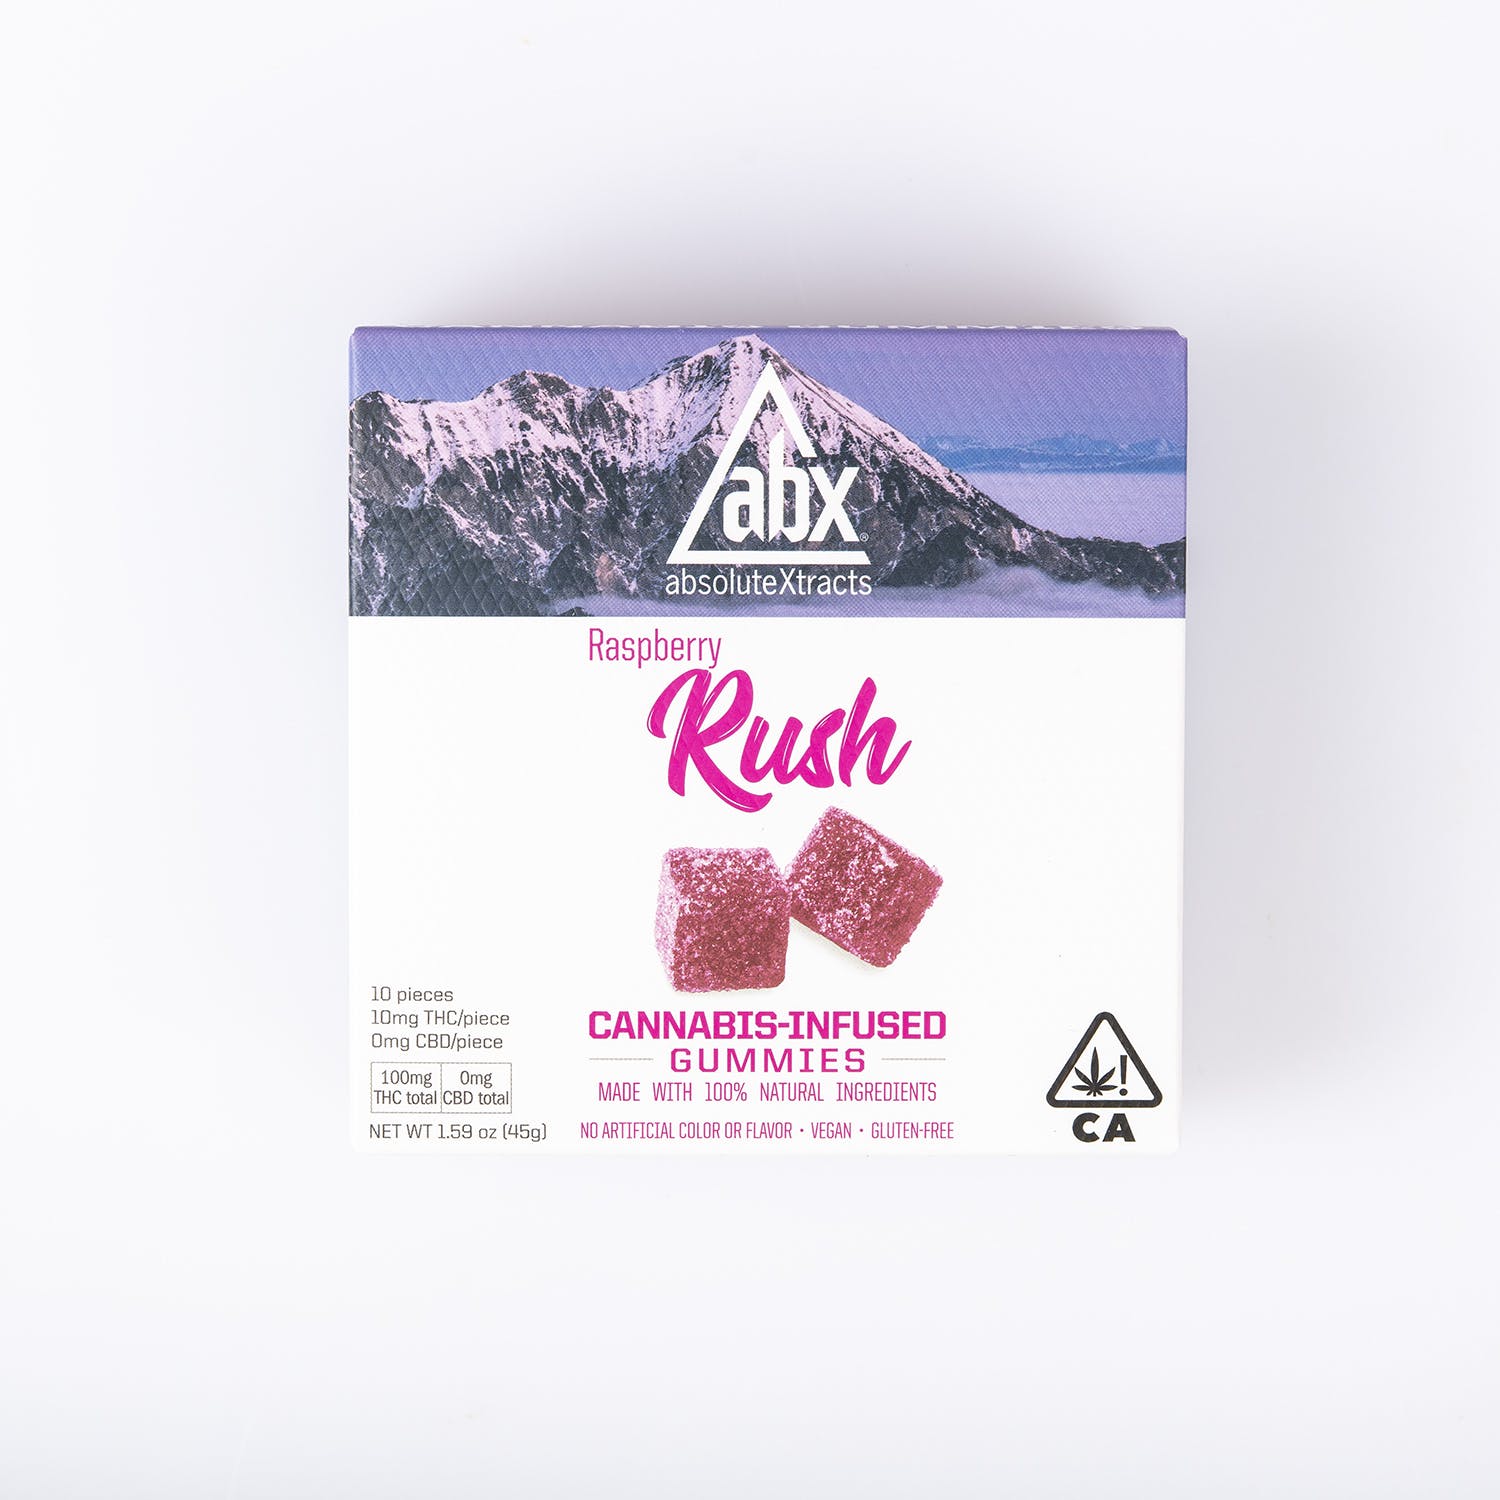 Raspberry Rush Gummies, Absolute Xtracts